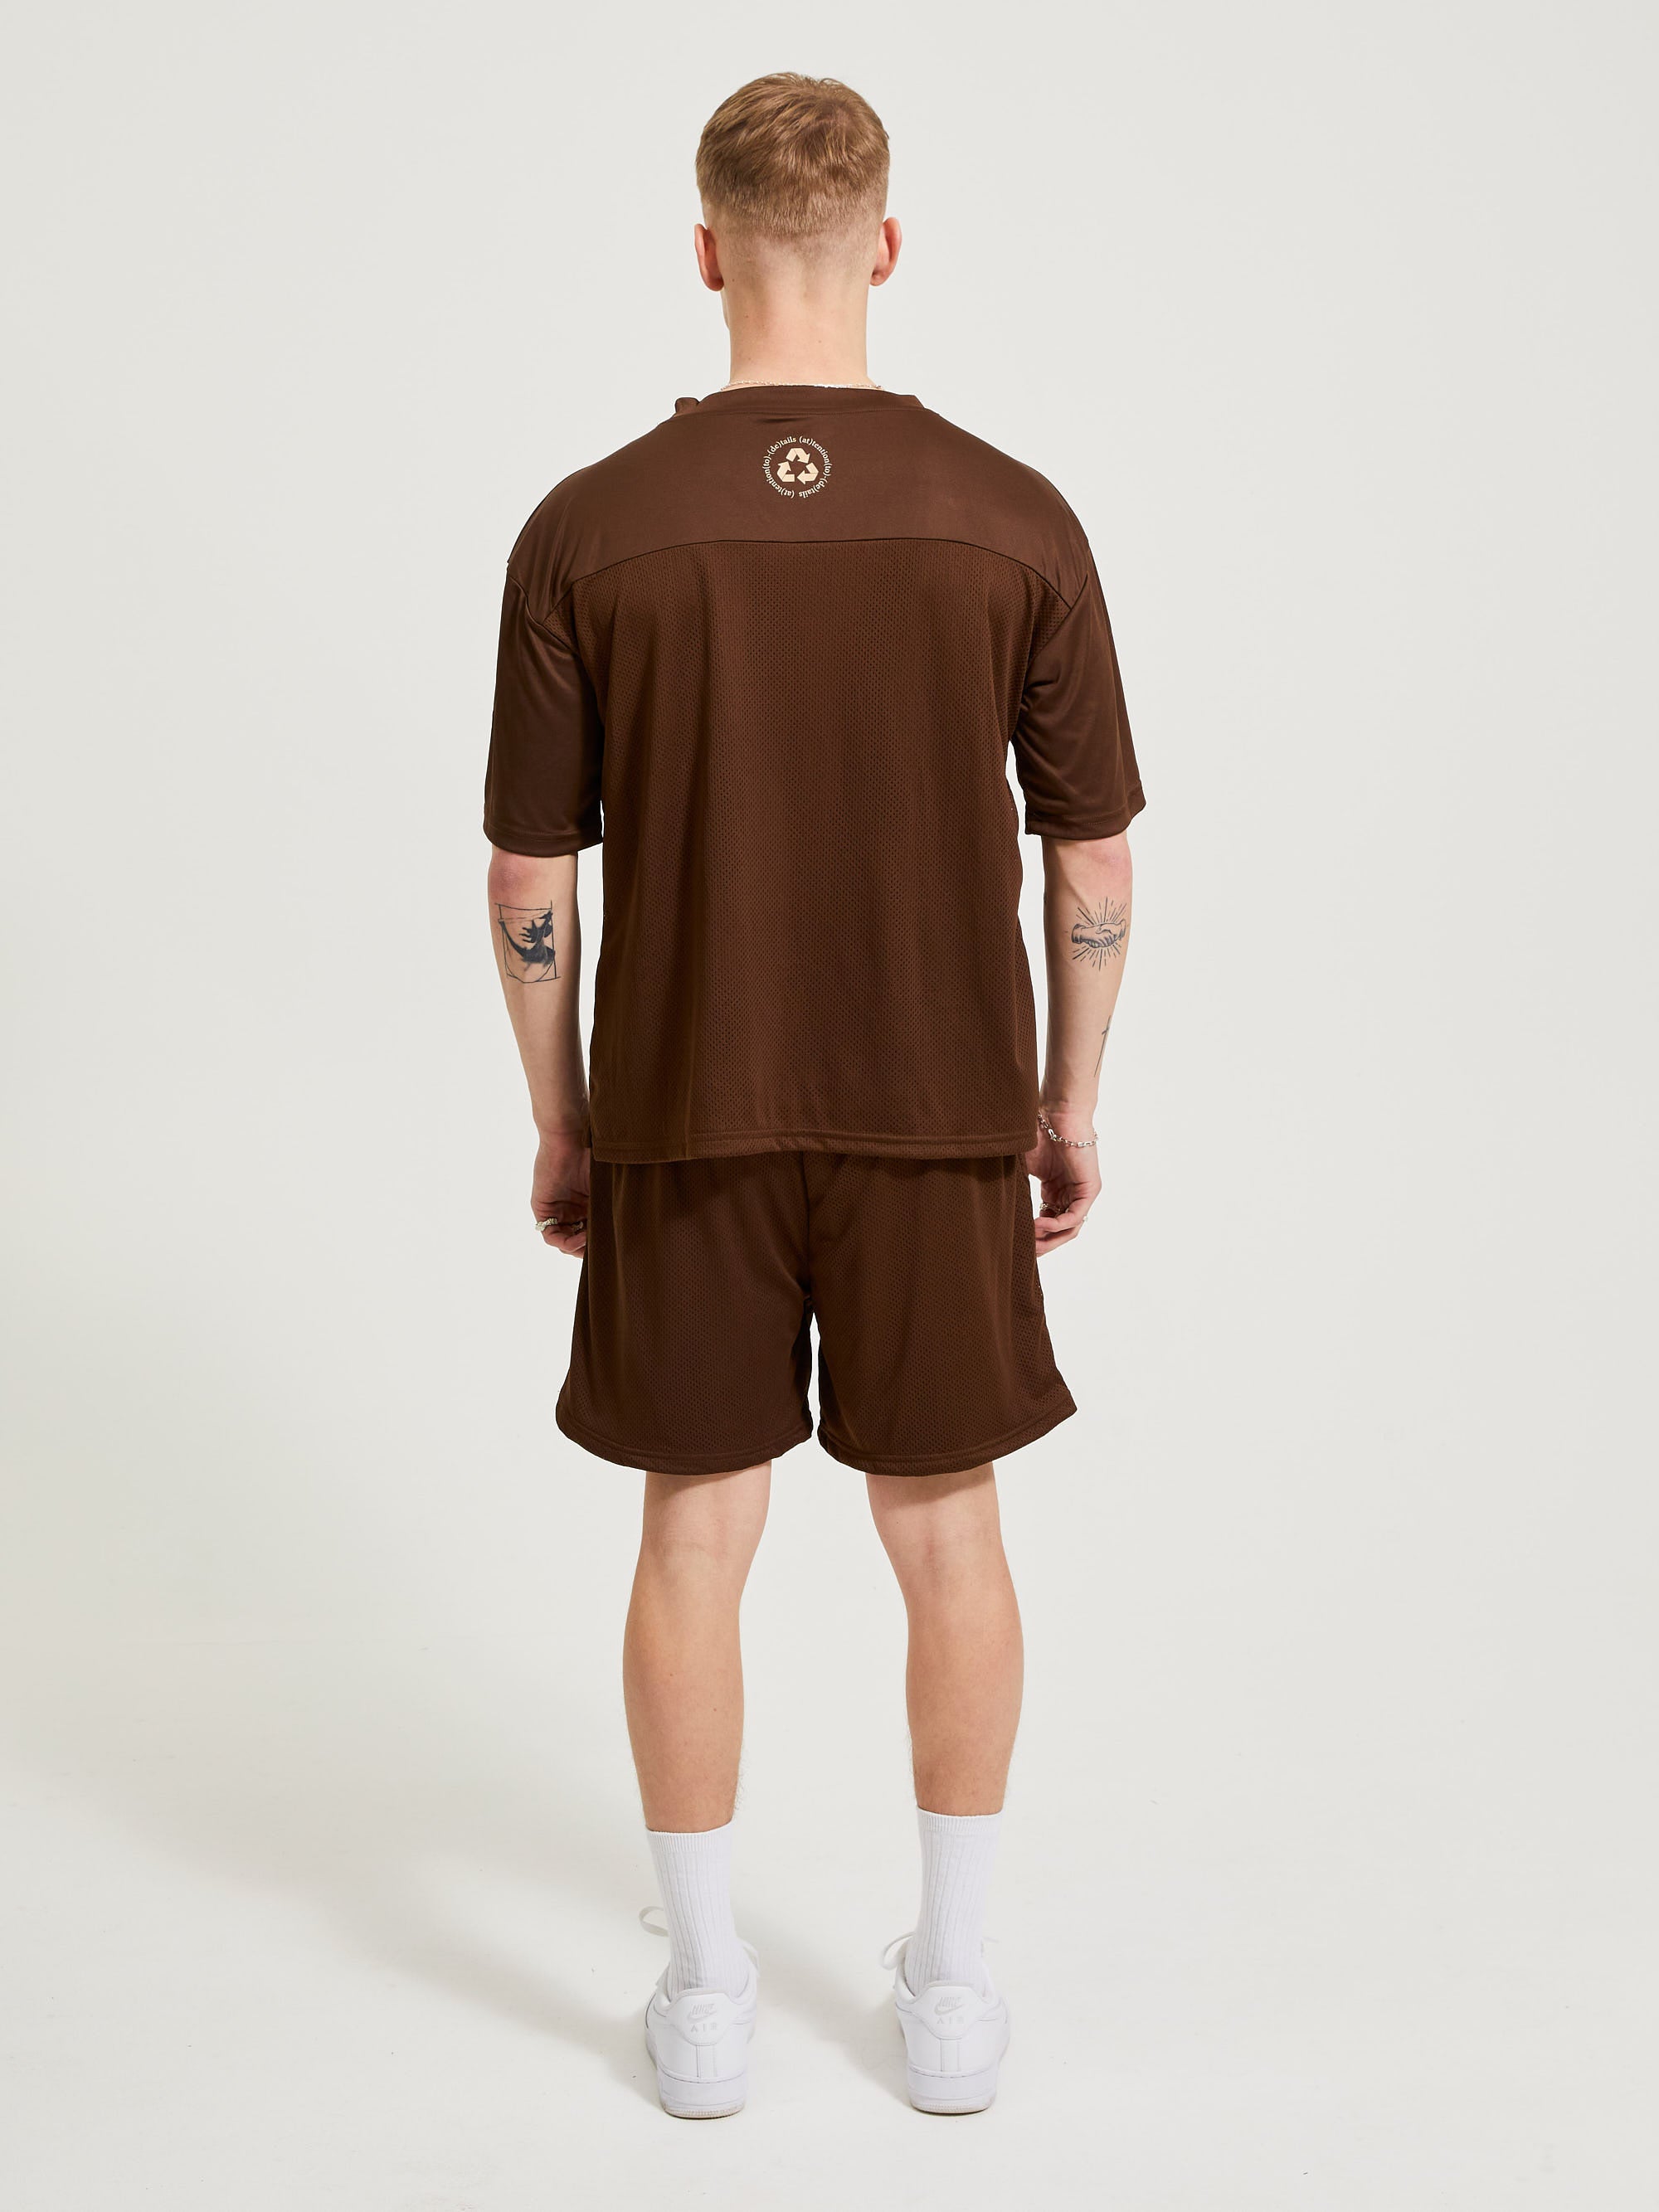 BOXY SPORTS T-SHIRT BROWN - ATTODE